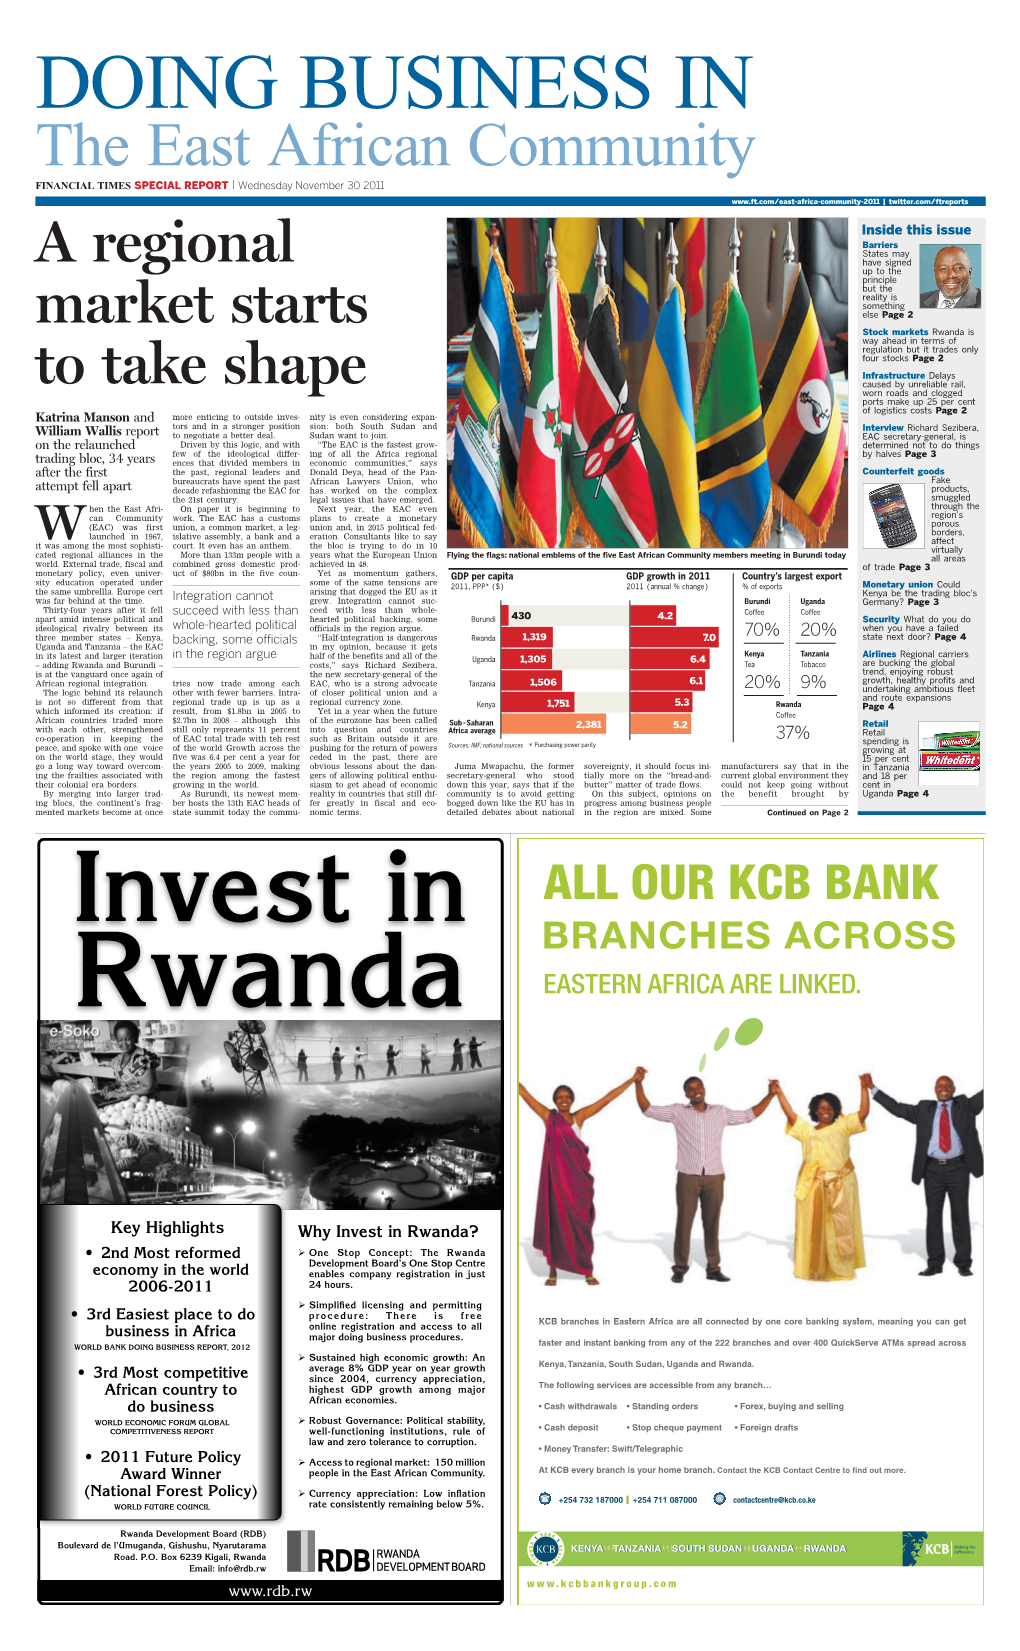 The East African Community FINANCIAL TIMES SPECIAL REPORT | Wednesday November 30 2011 | Twitter.Com/Ftreports